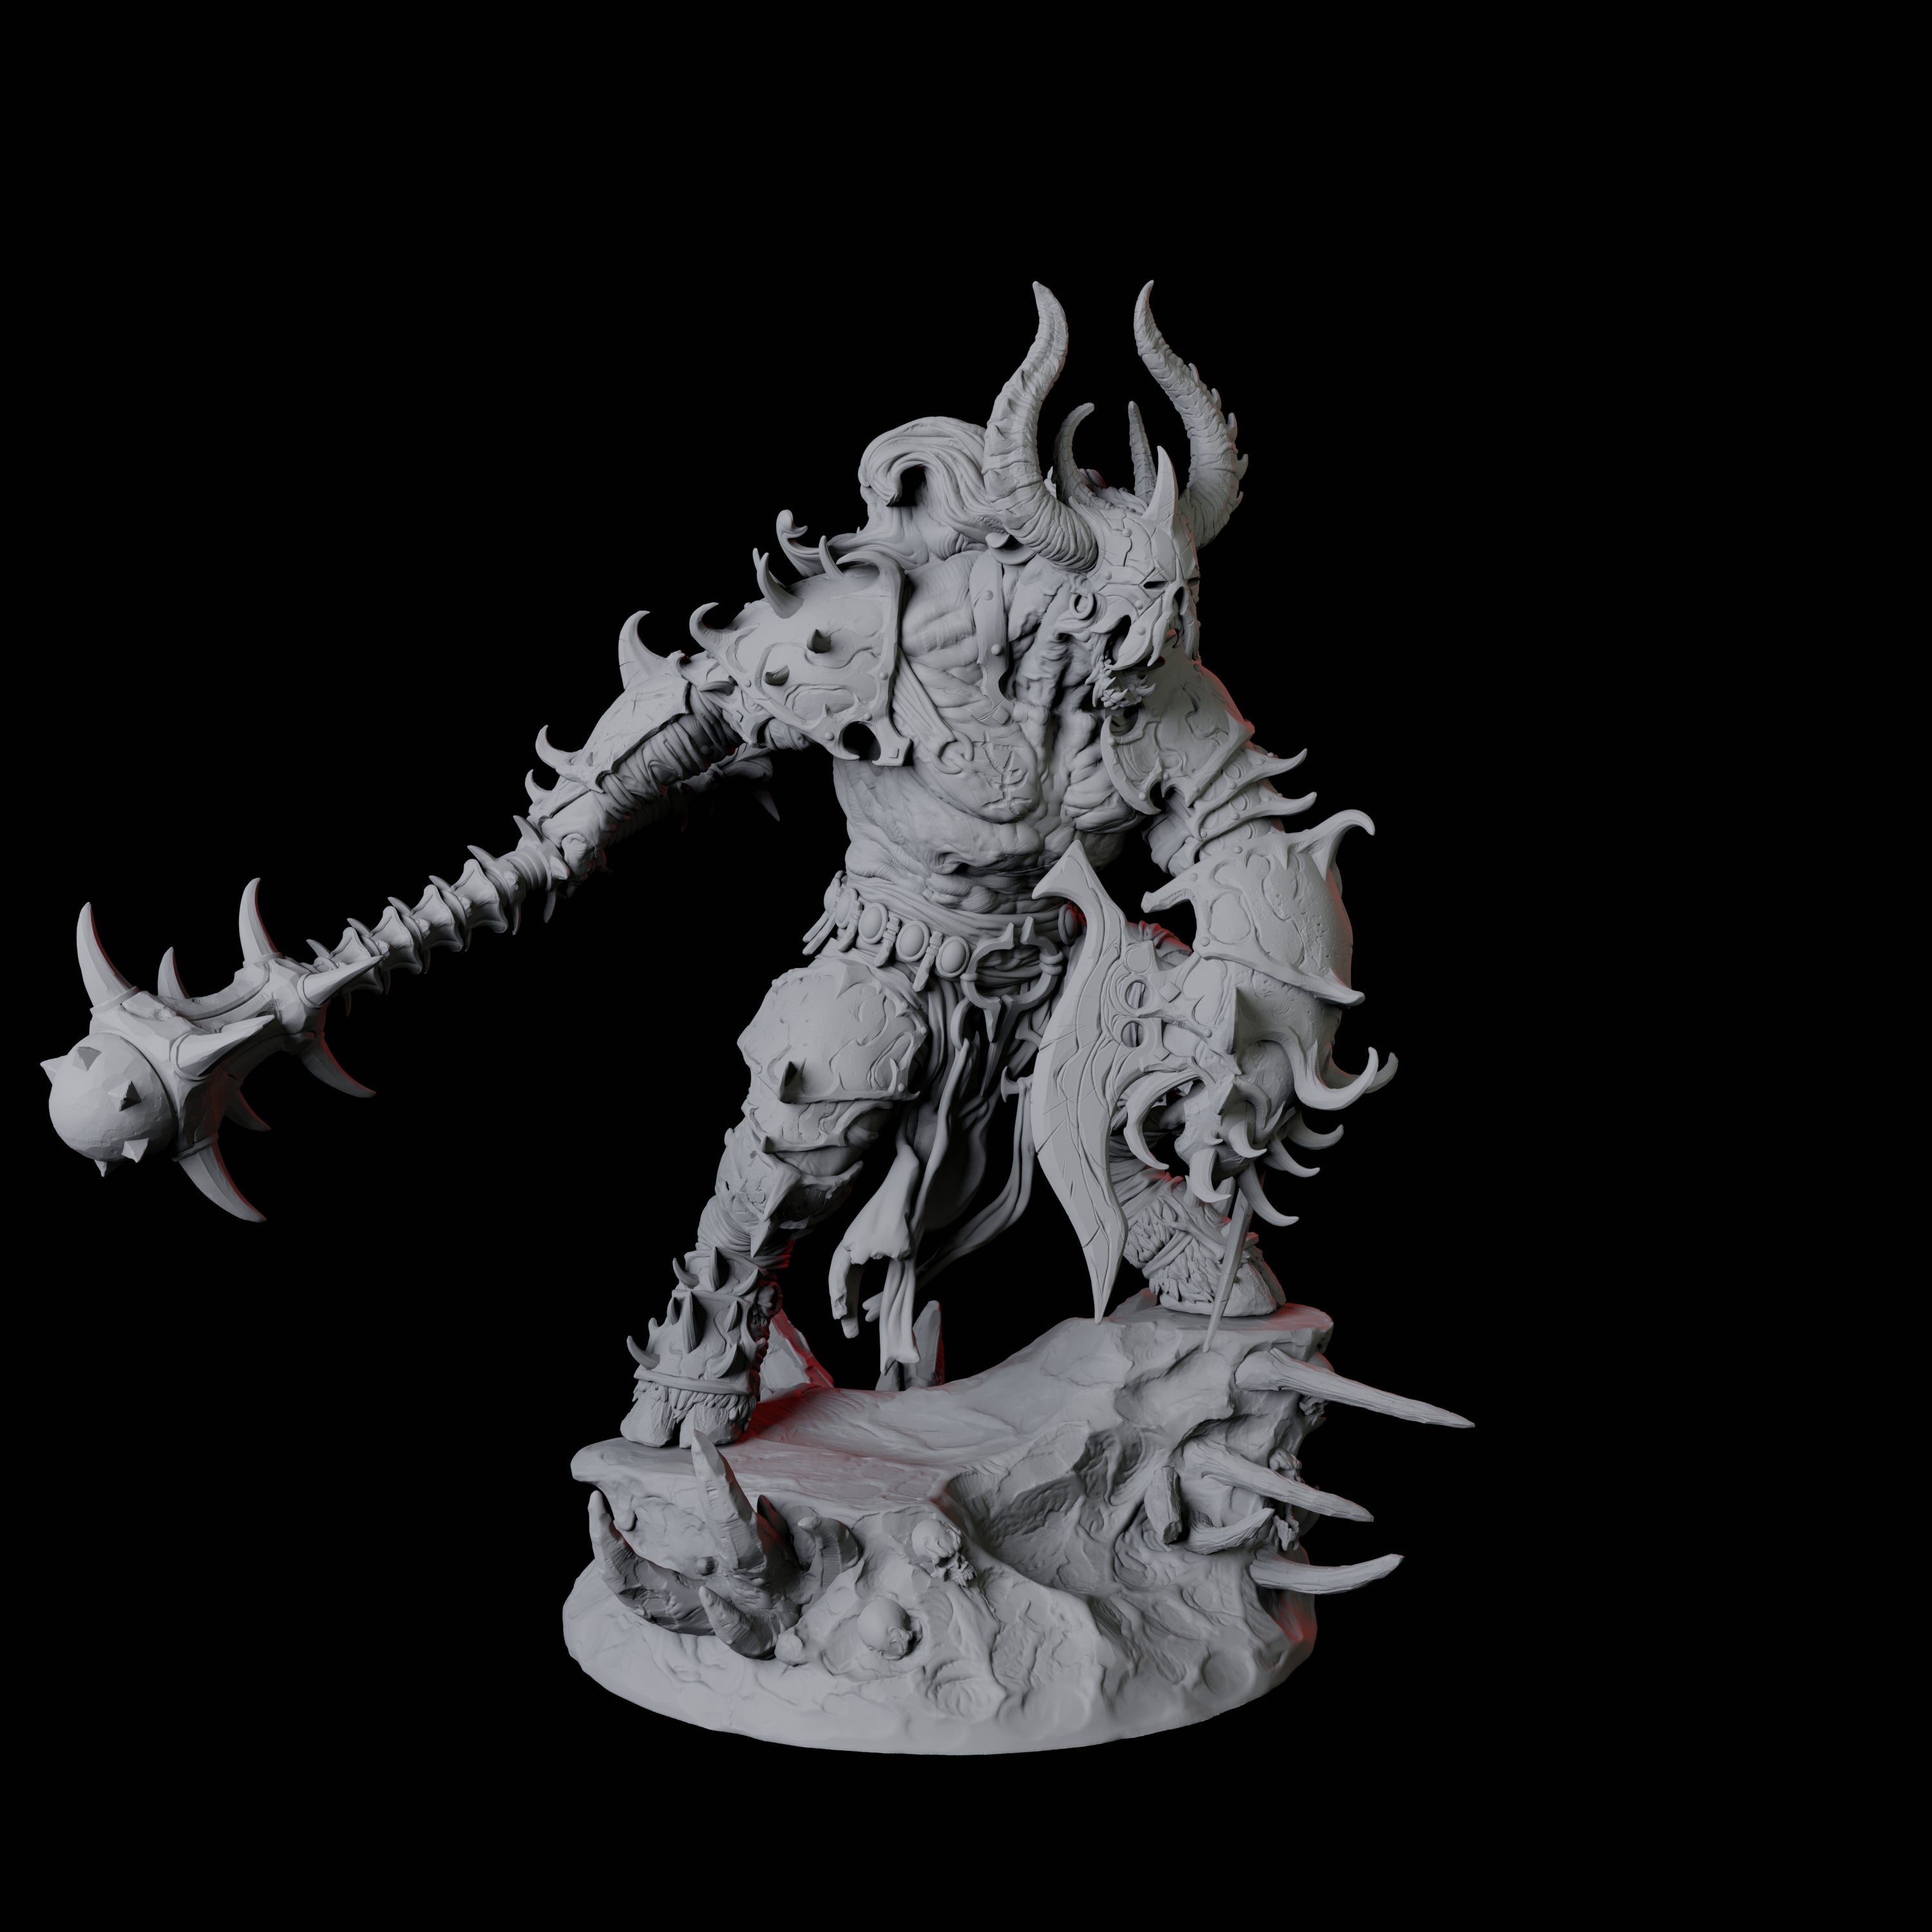 Savage Roru Demon C Miniature for Dungeons and Dragons, Pathfinder or other TTRPGs